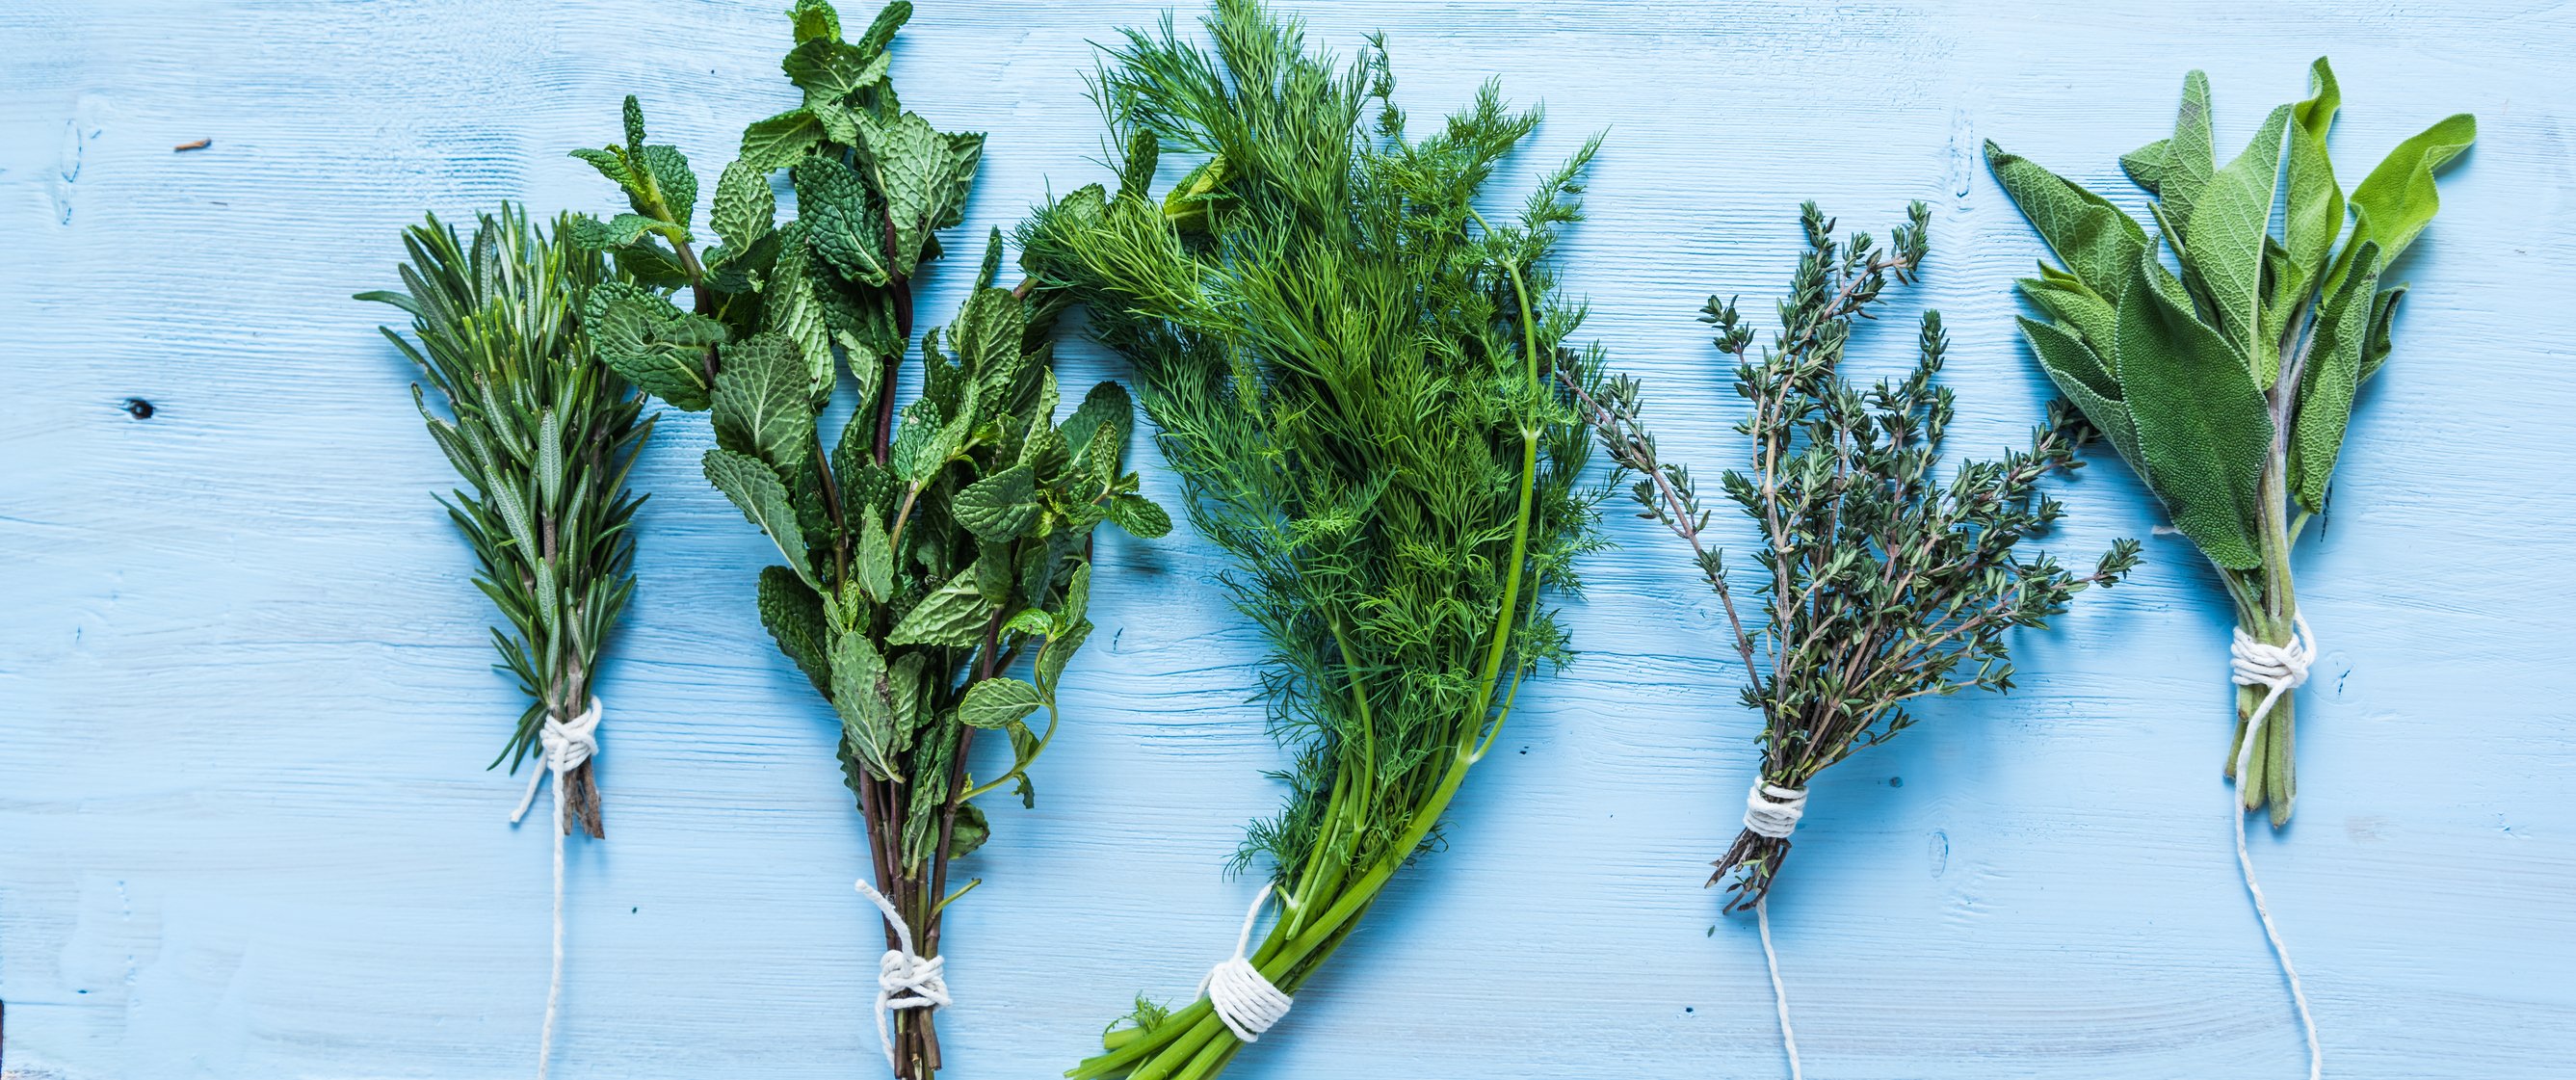 Rosemary, peppermint, and other plants drying on a table